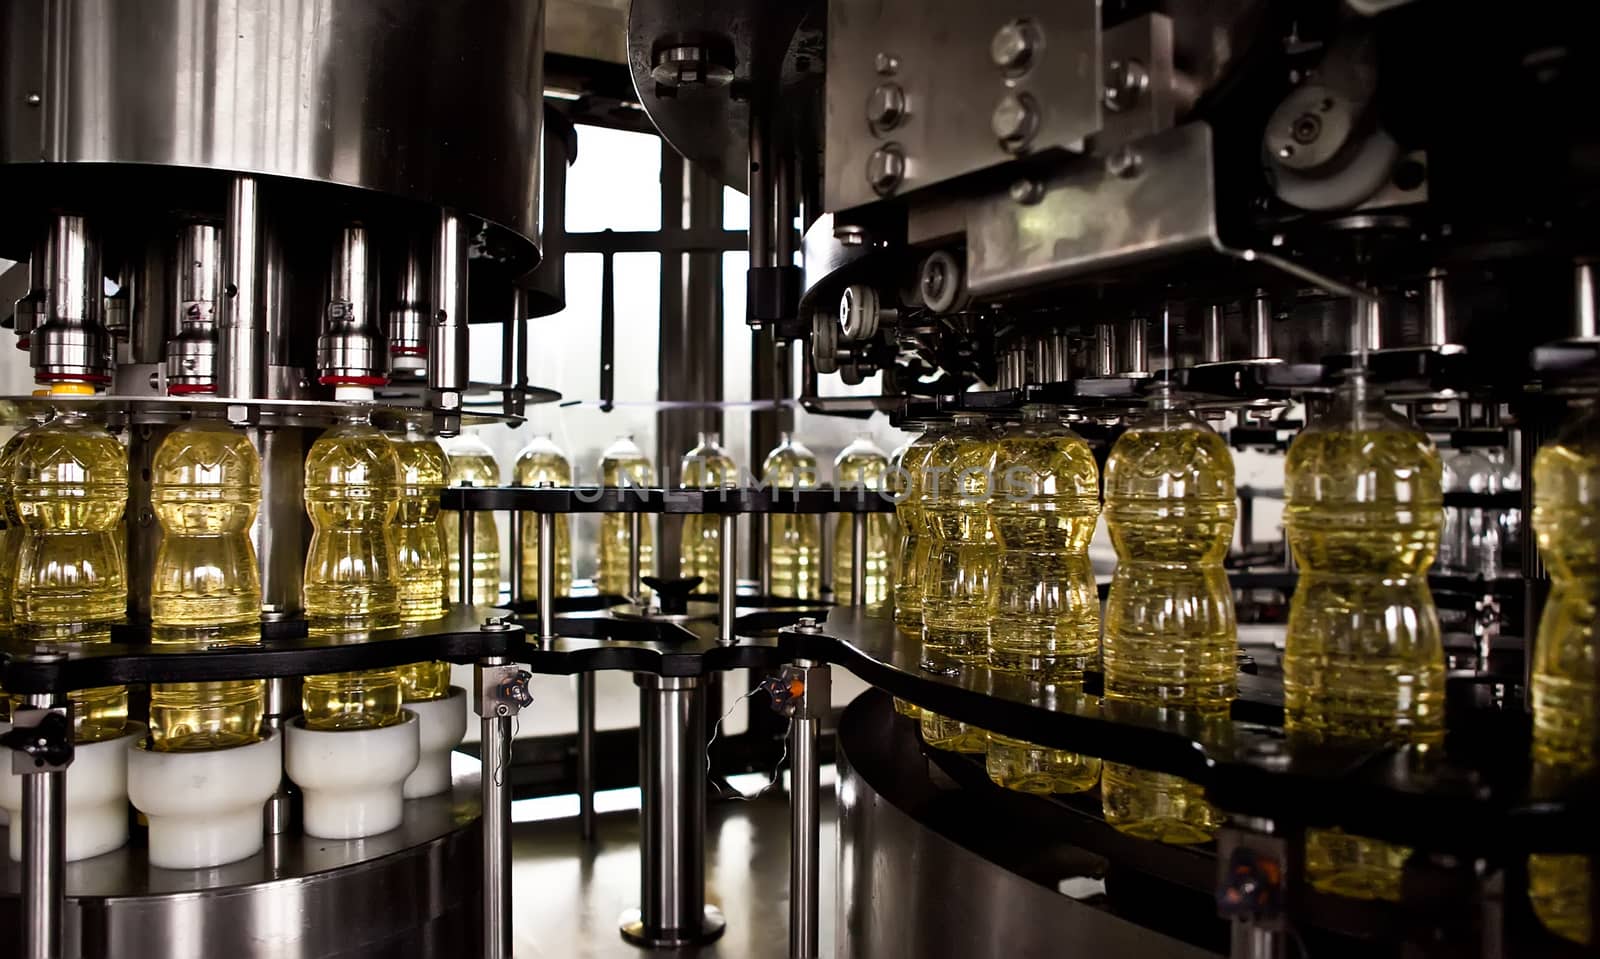 Sunflower oil in the bottle moving on production line. Shallow dof. by sarymsakov